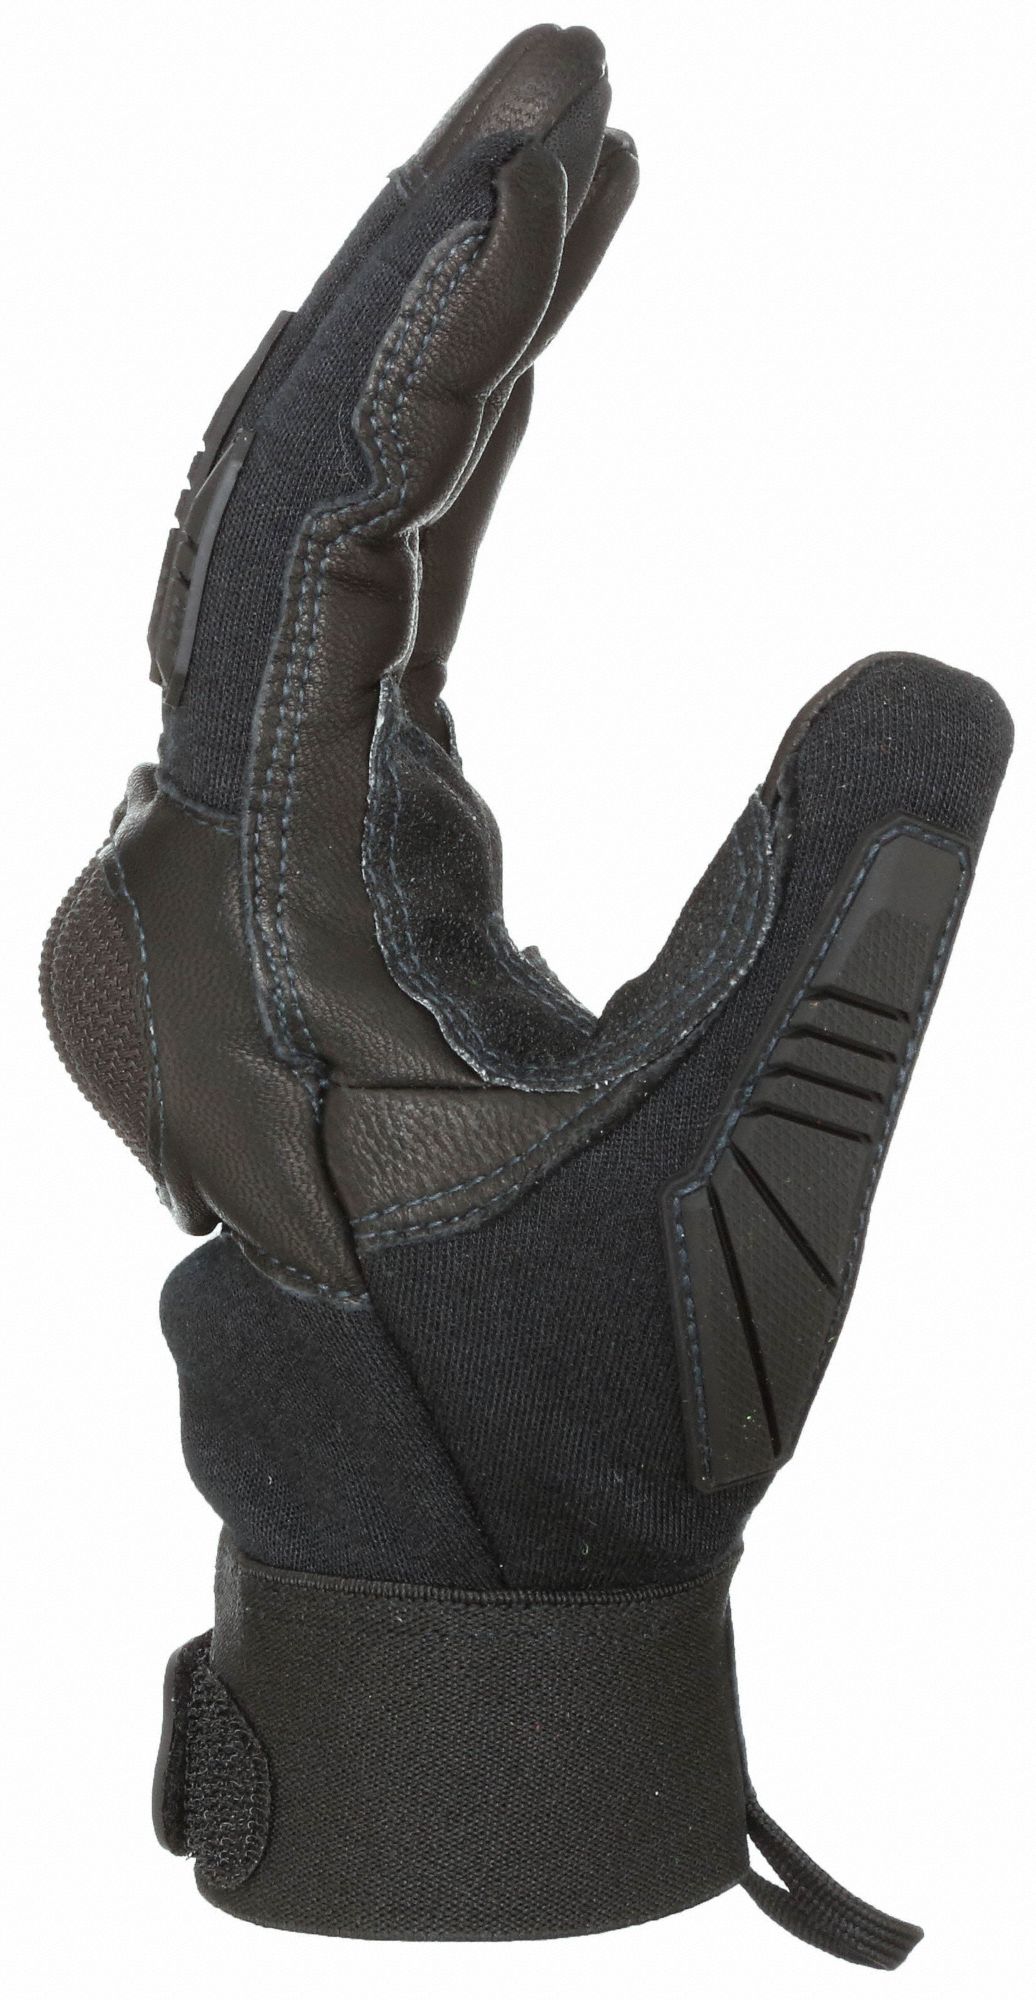 RINGERS GLOVES Tactical Glove, Goatskin Leather Palm Material, L, Black ...